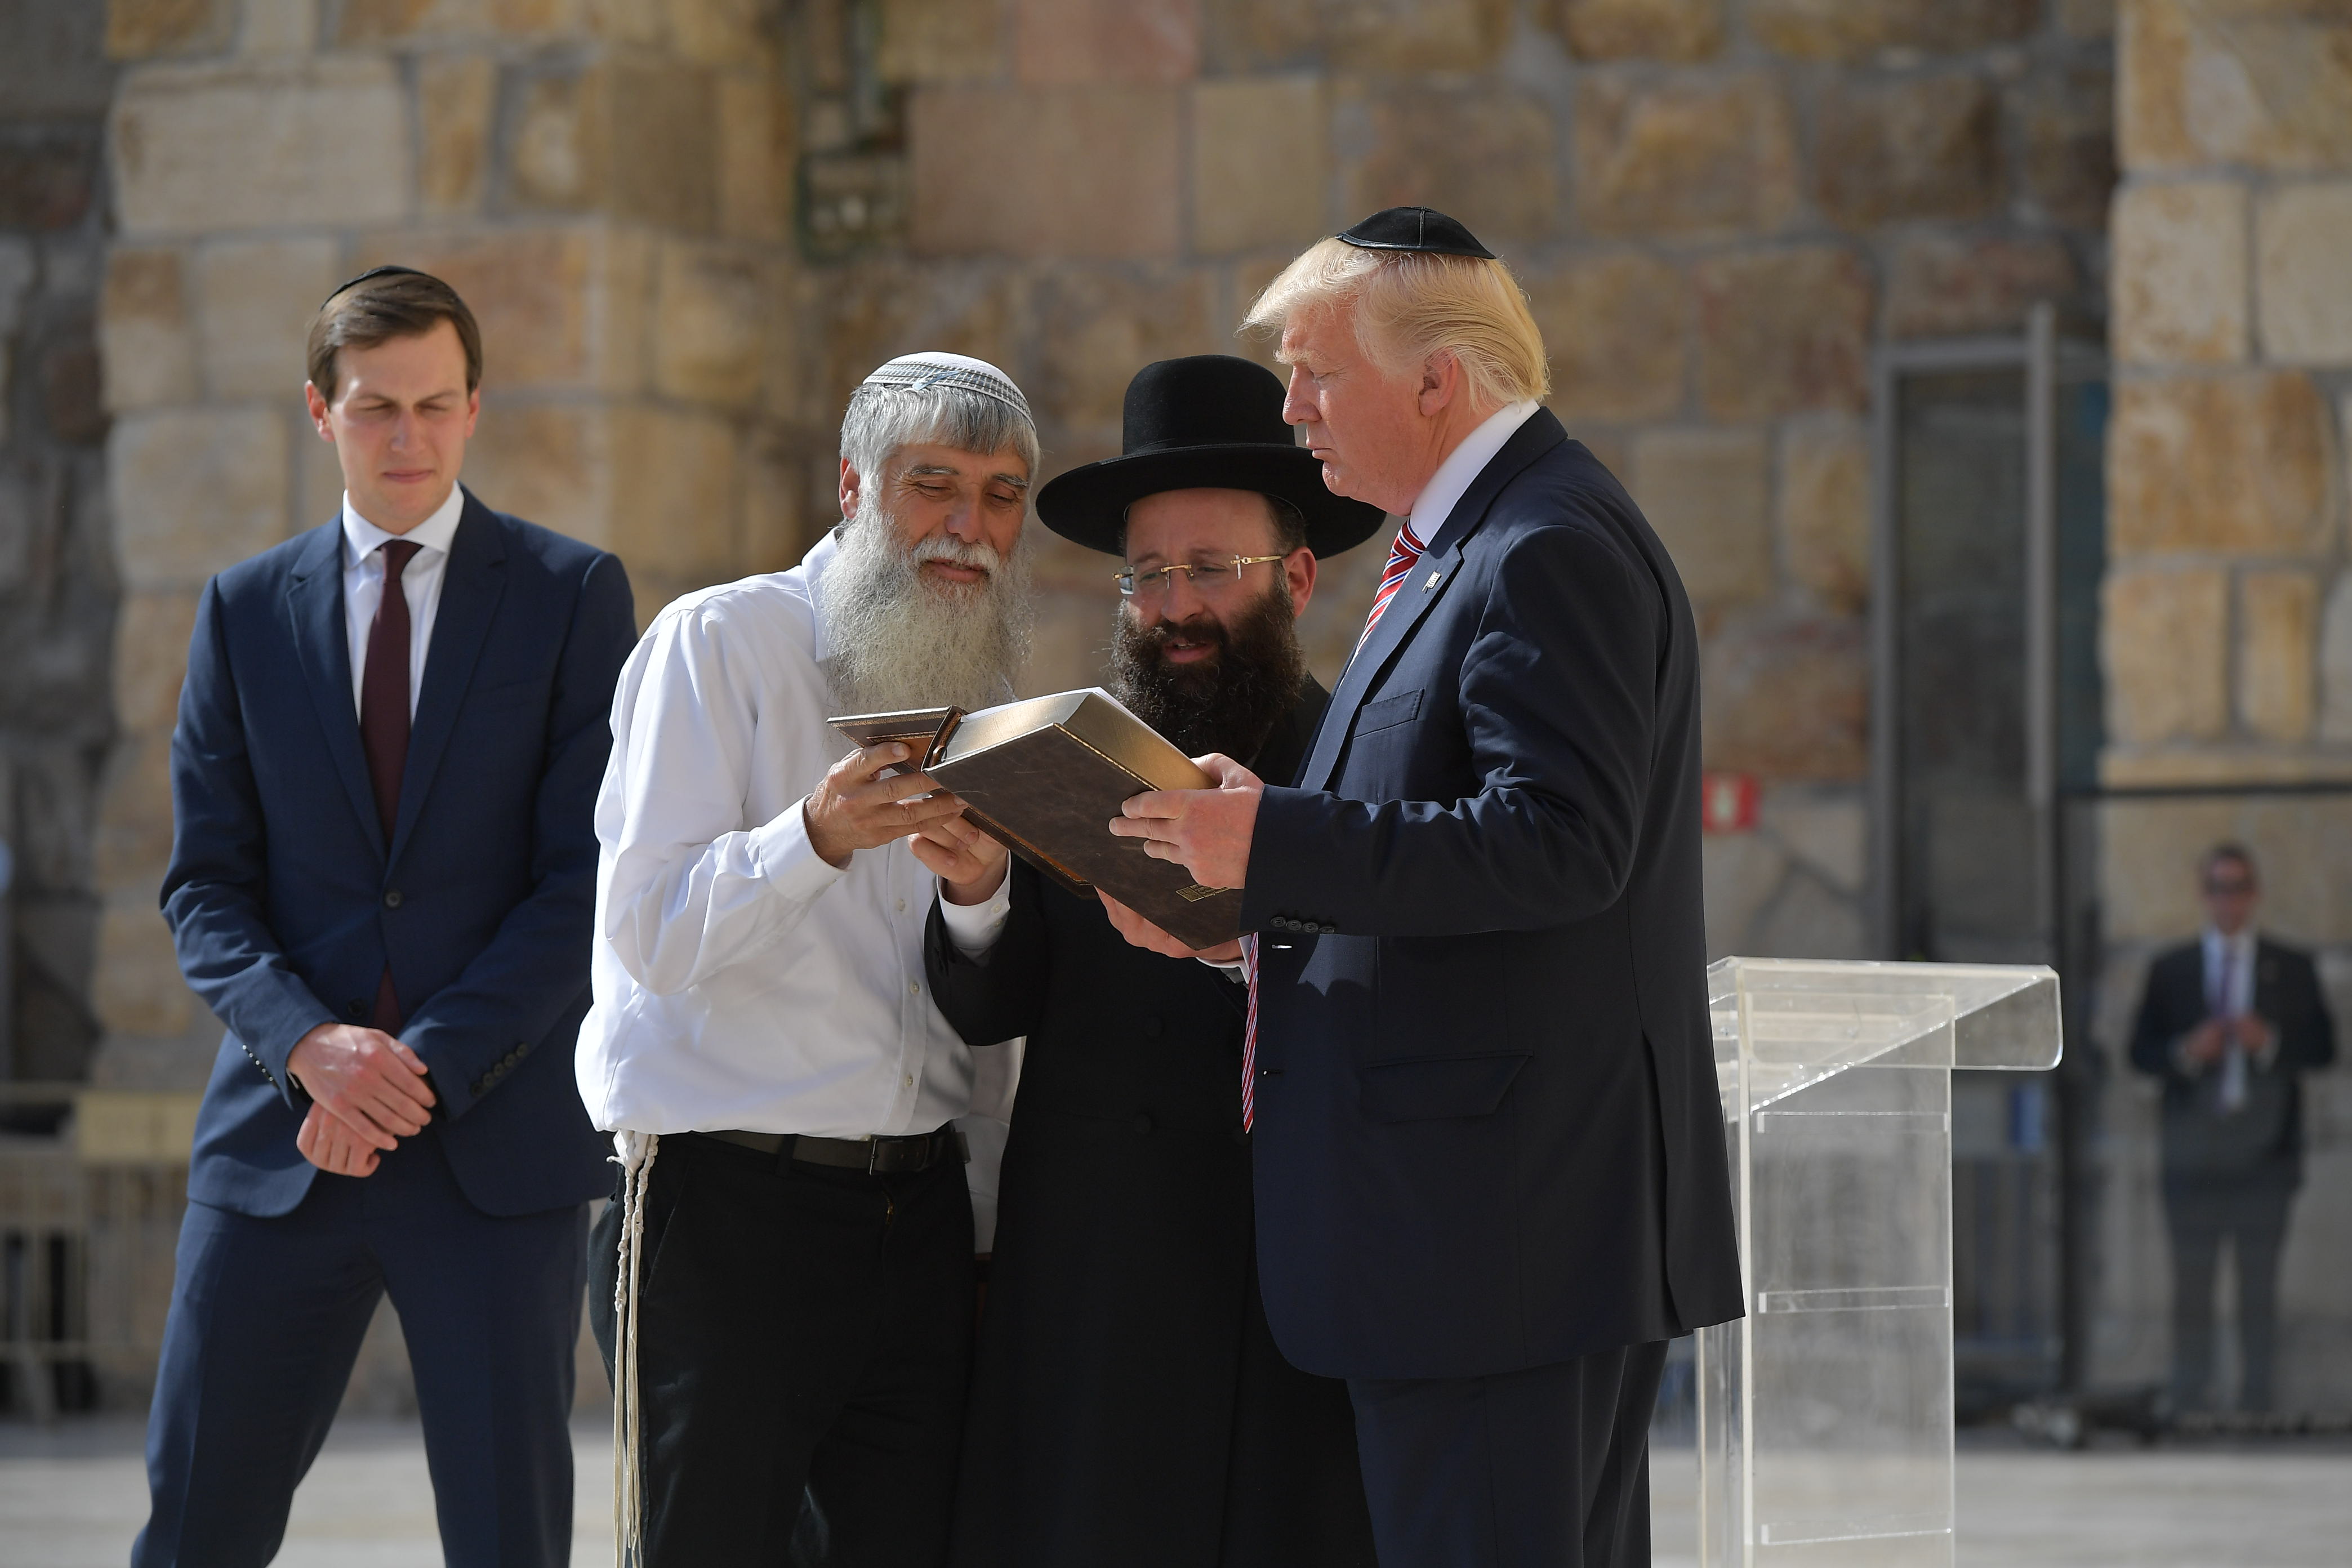 US President Donald Trump listens to Rabbi Shmuel Rabinovitch (C) during a visit to the Western Wall, the holiest site where Jews can pray, in Jerusalems Old City on May 22, 2017. On the left, Trump's son-in-law and senior advisor Jared Kushner. (Photo: MANDEL NGAN/AFP via Getty Images)